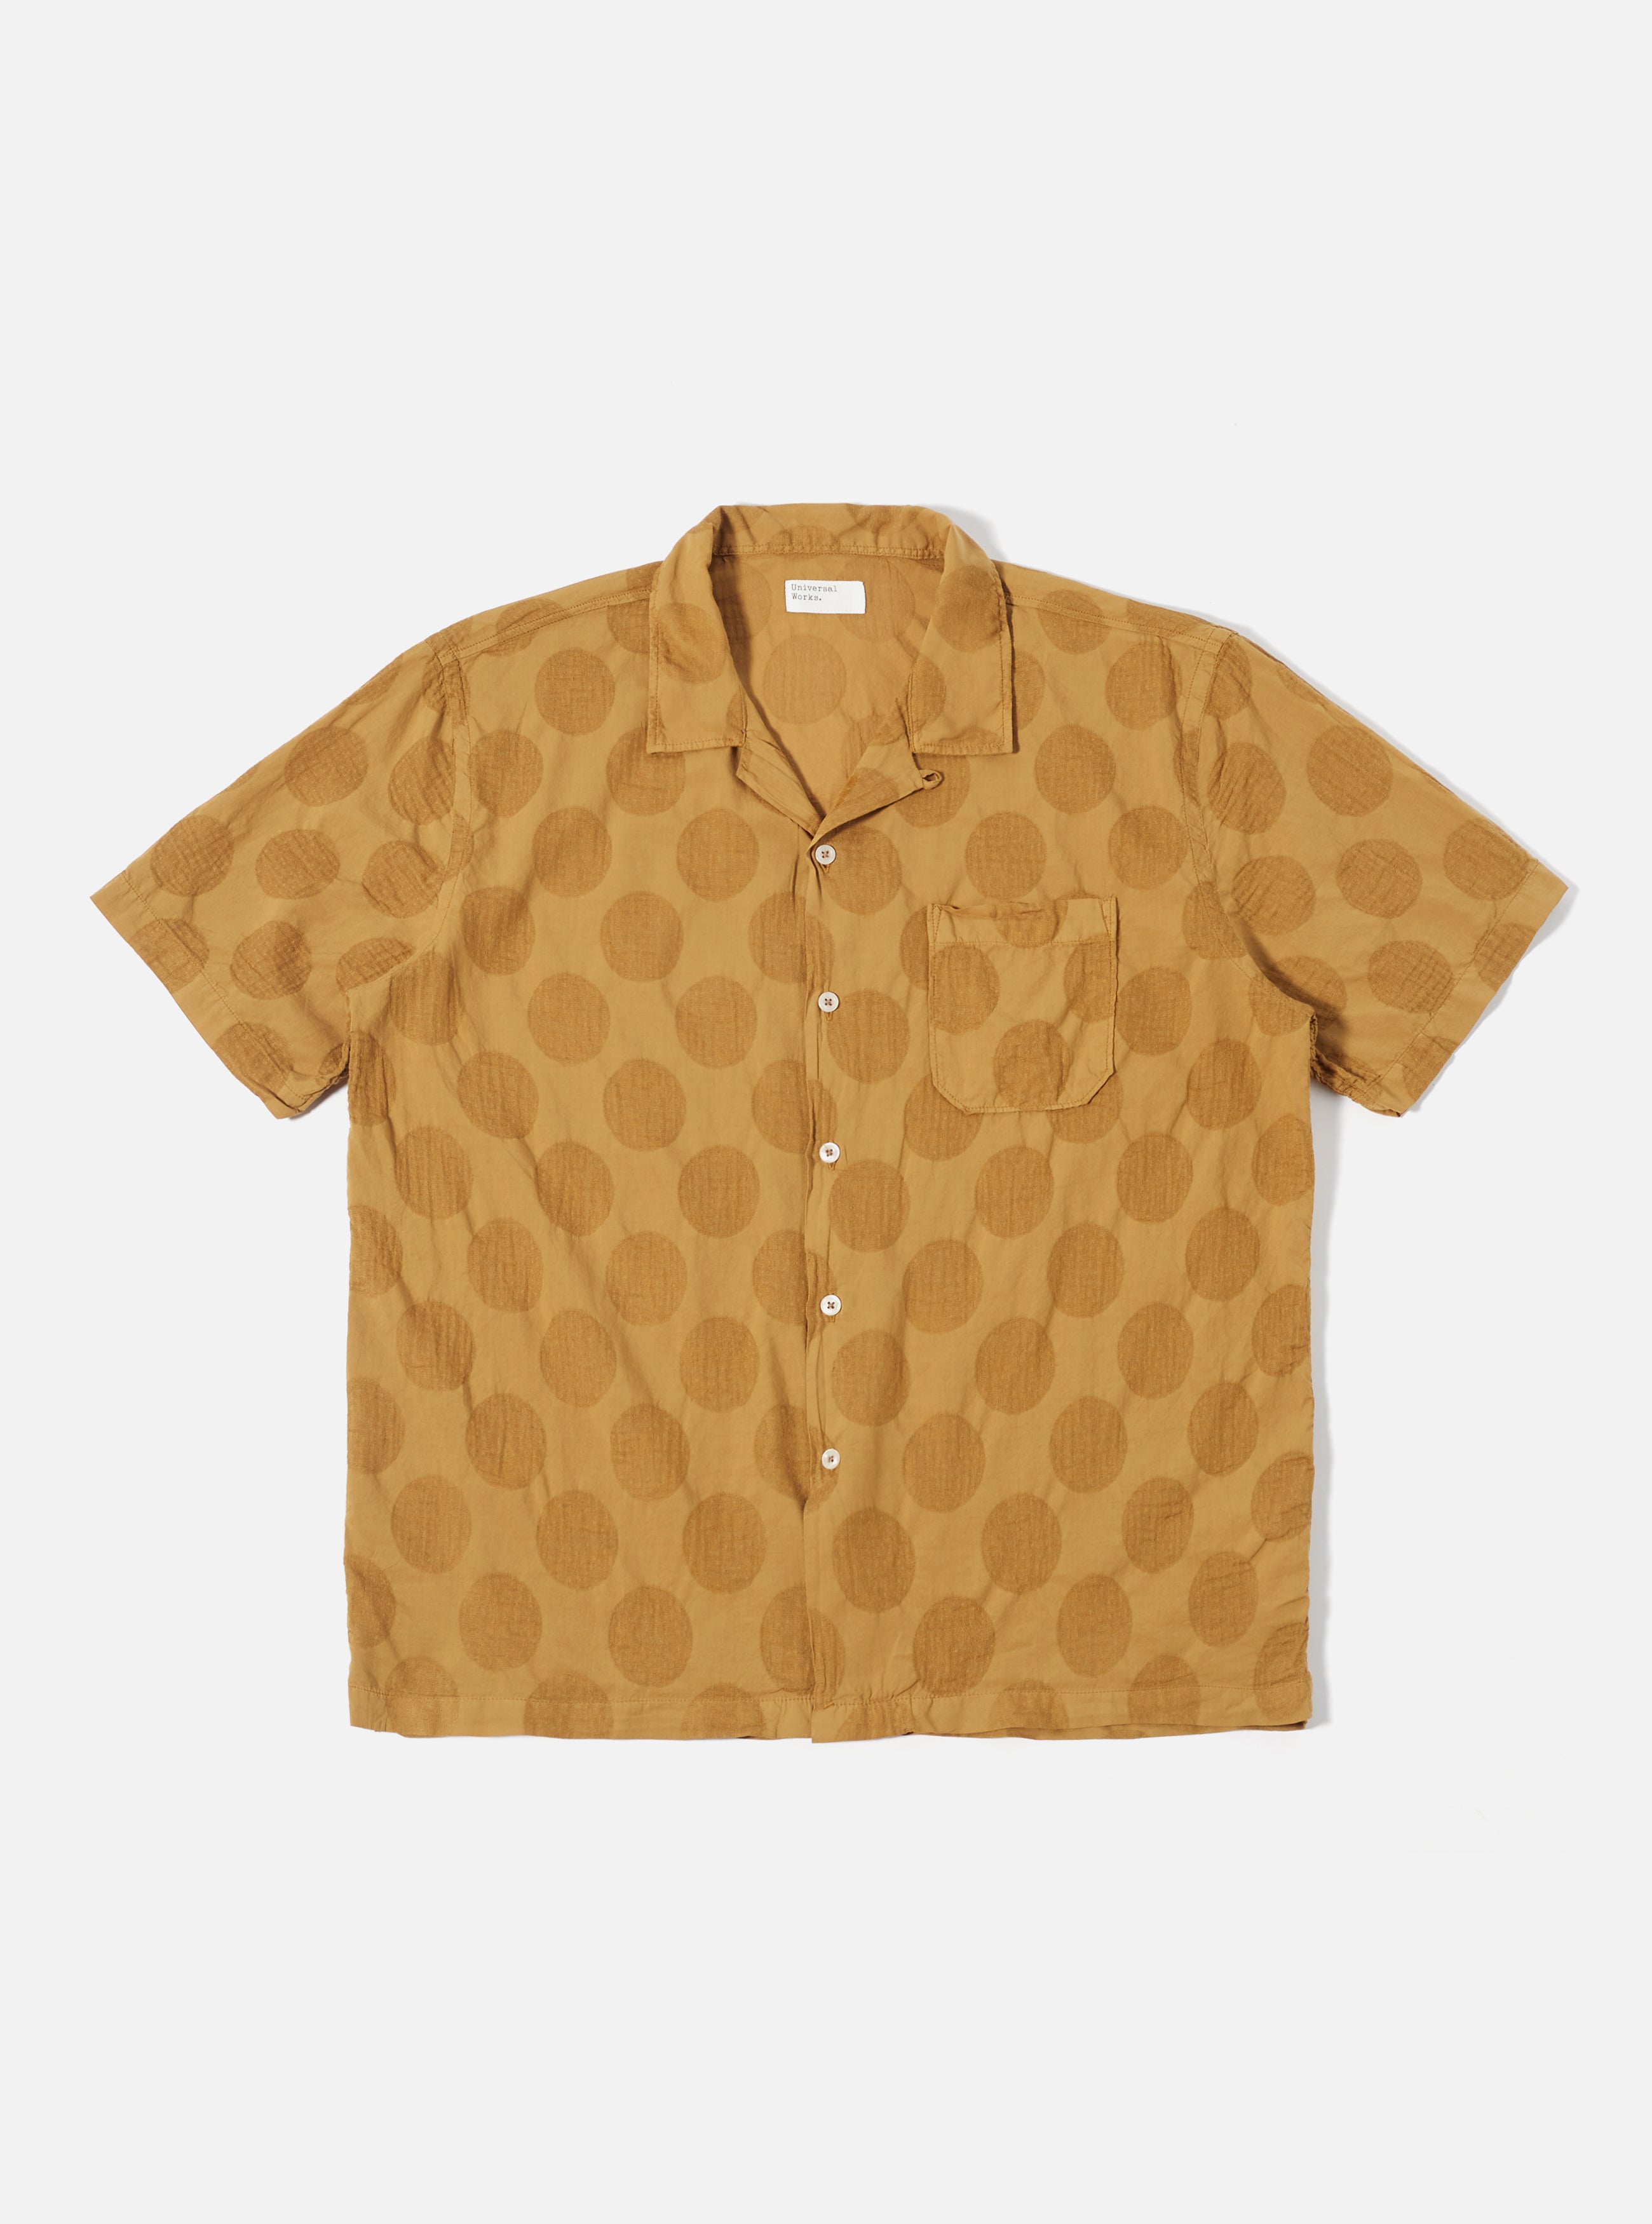 Our classic simple short sleeve summer shirt. Designed to be worn open-necked for a 1950s-style relaxed fit, but has a loop-close top button also. Super-lightweight 100% cotton Italian fabric, over-dyed to reveal a subtle dot pattern in the weave.